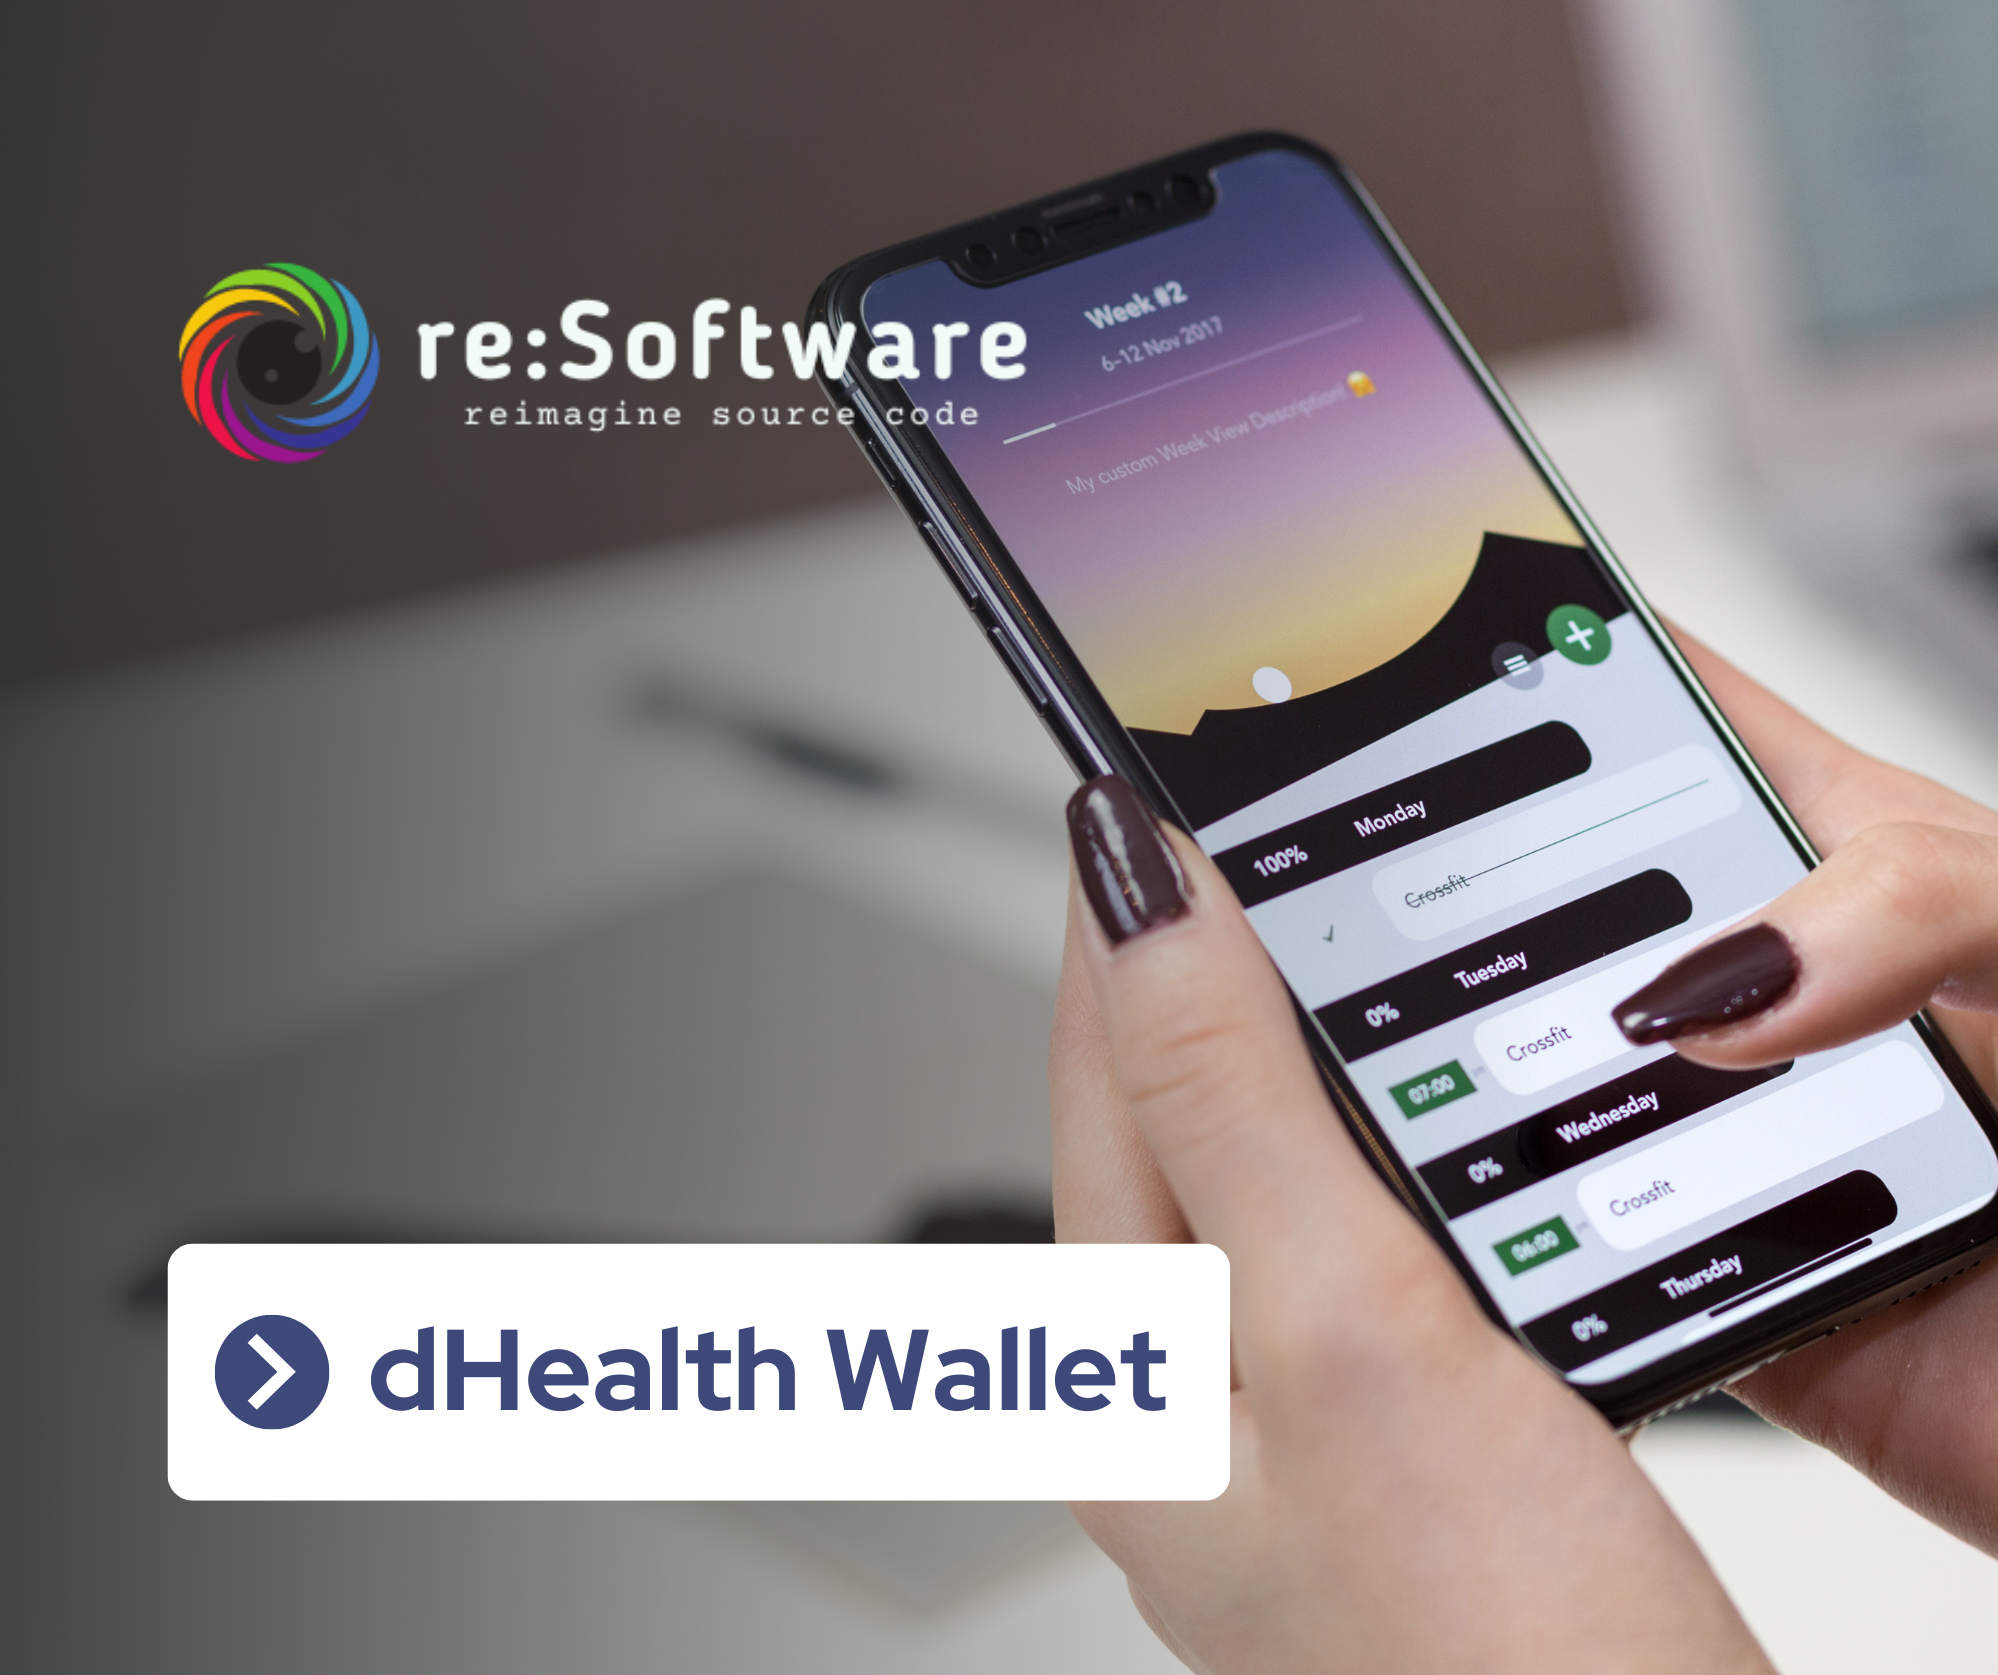 dHealth Wallet by re:Software S.L.